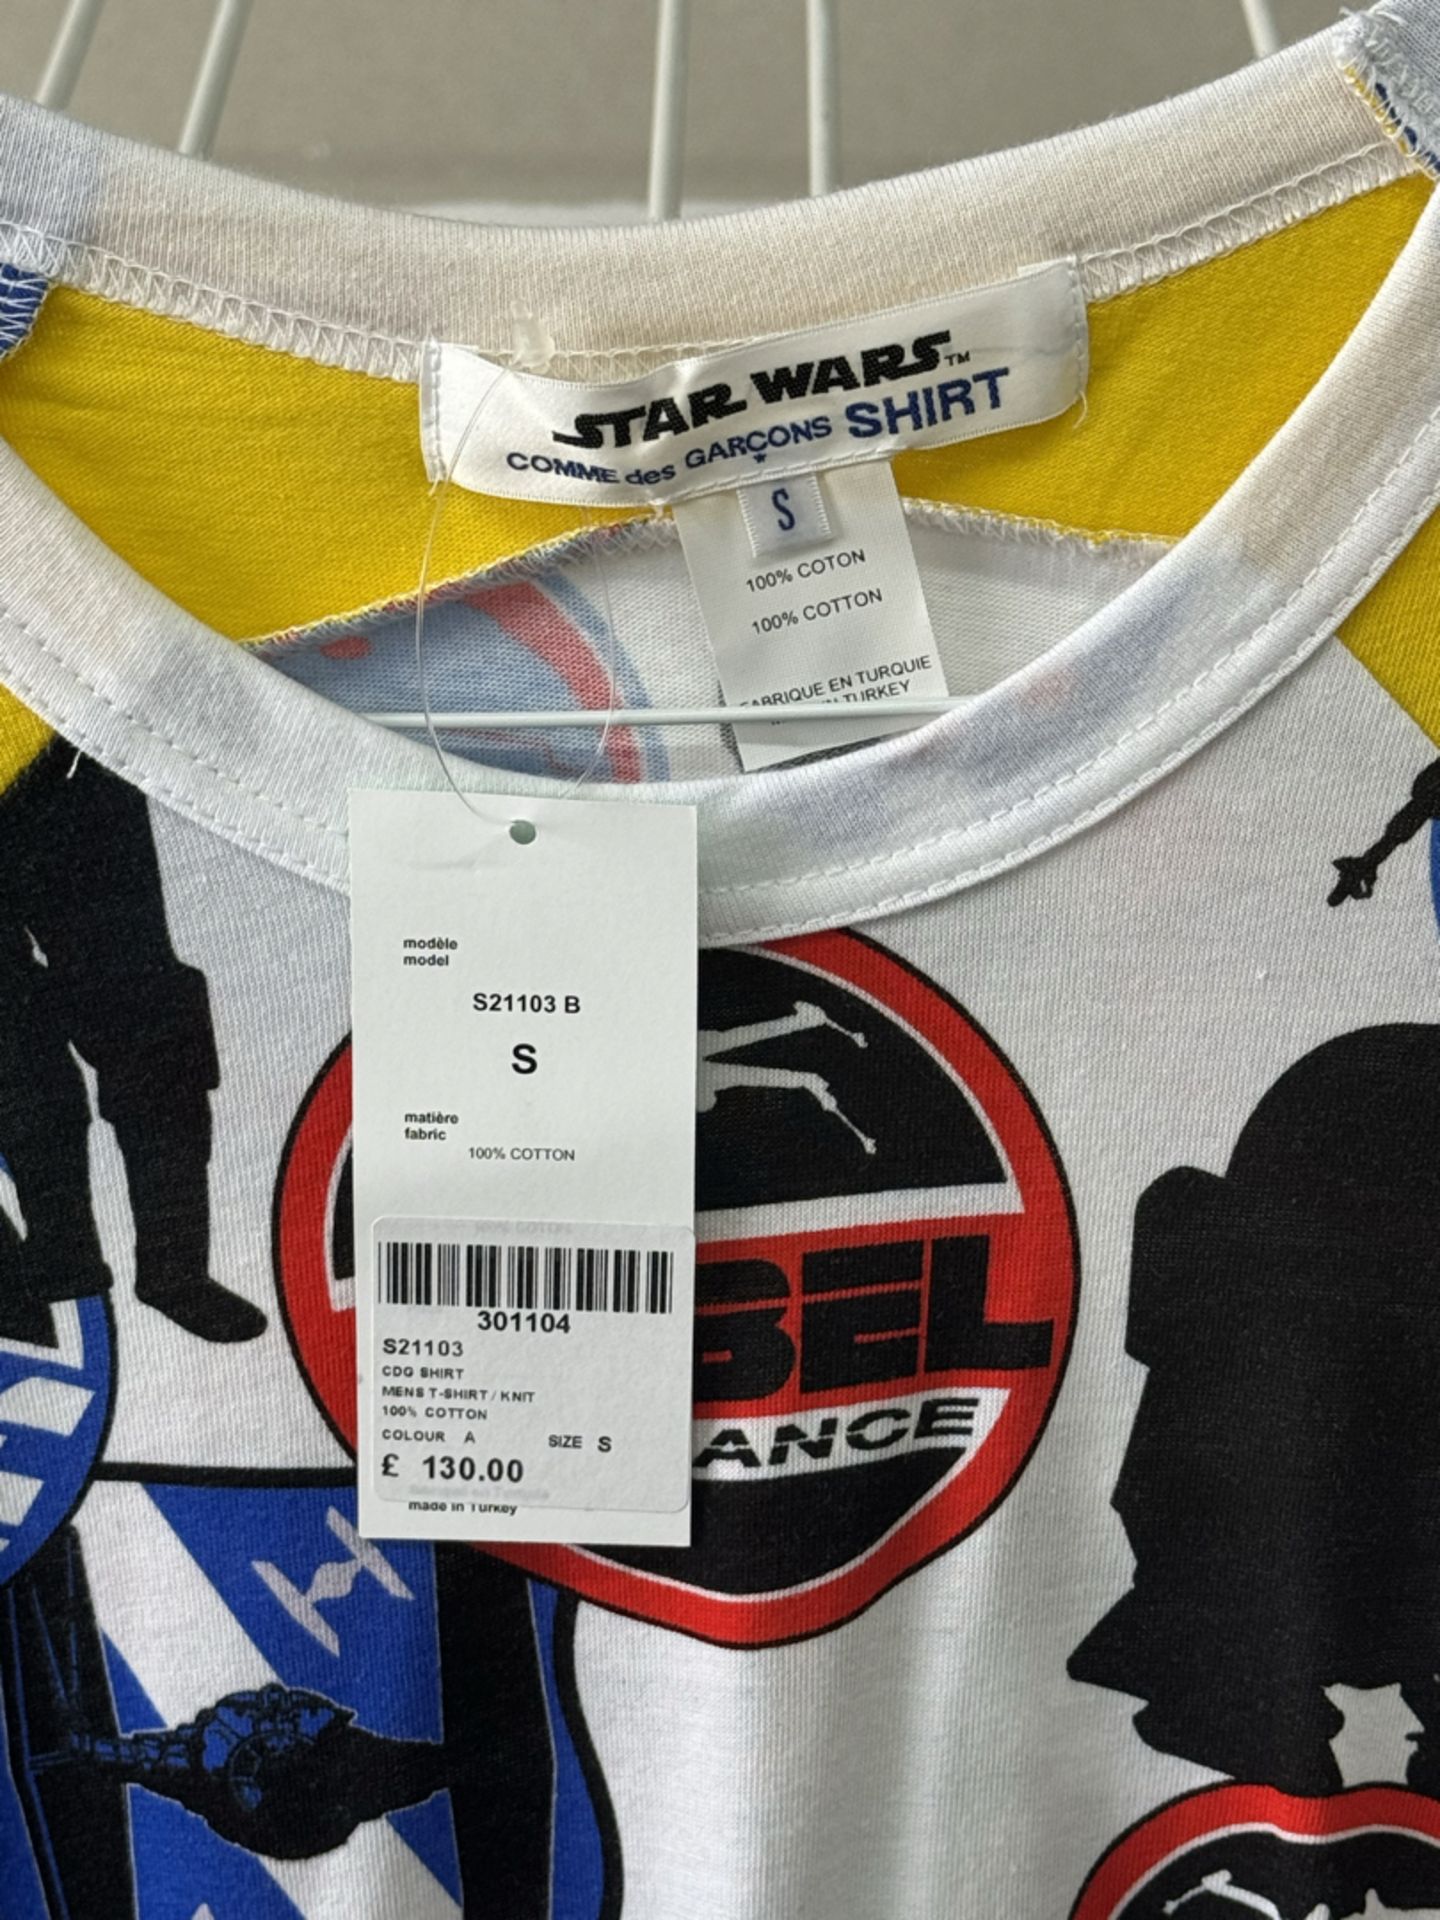 Comme Des GarÃ§ons Mens Star Wars T-Shirt - New with Tags - Size Small (/medium) - RRP Â£130 - NO VA - Image 2 of 3